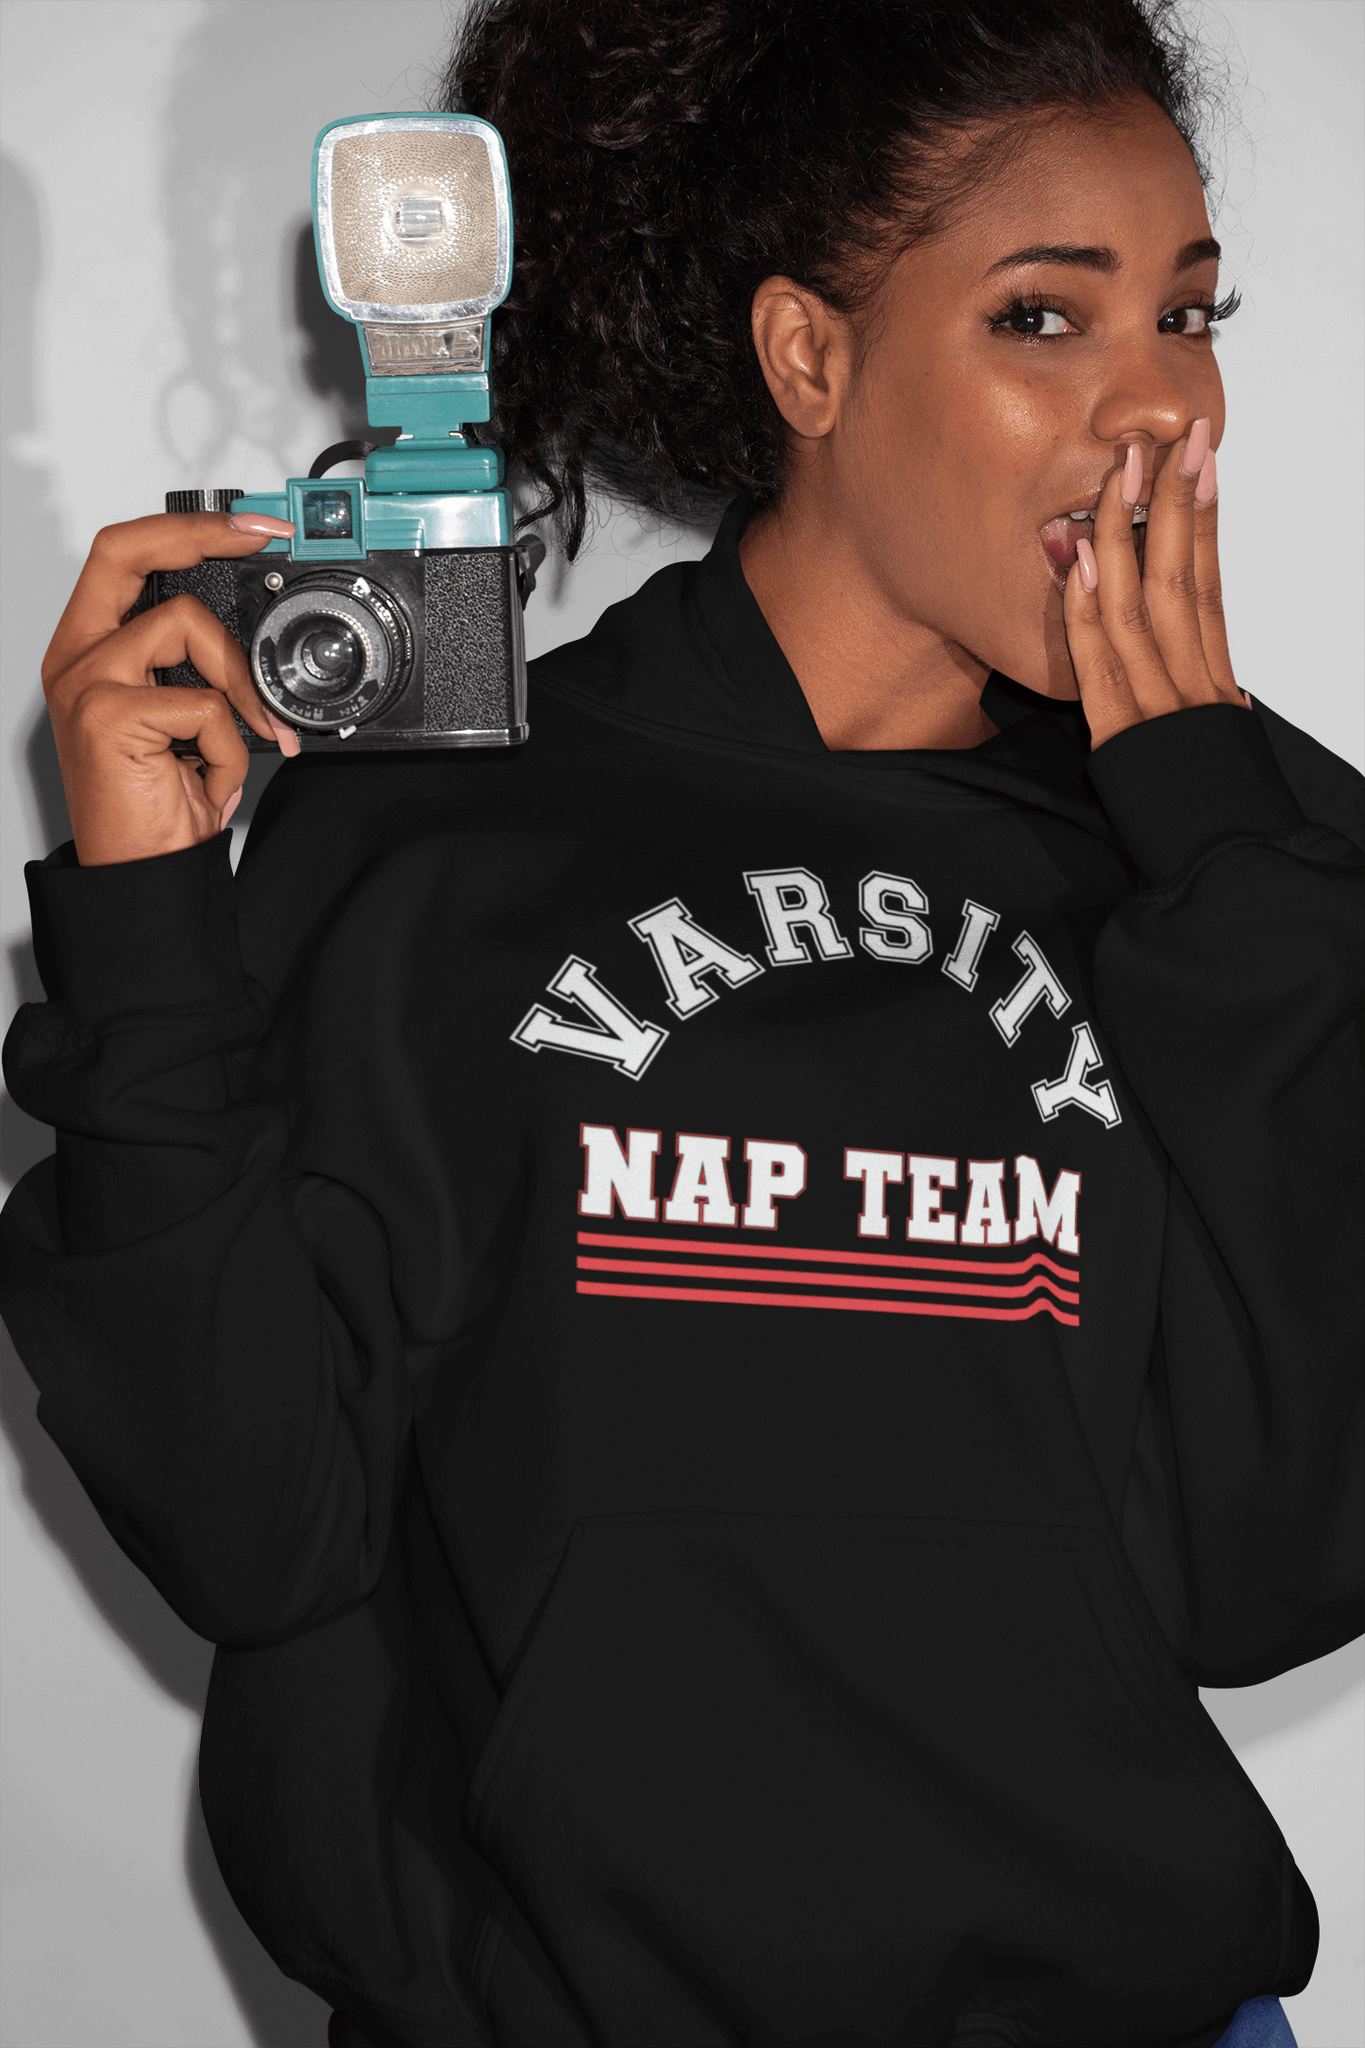 African American woman holding camera with hand over mouth wearing a black hoodie sweatshirt with Varsity Nap Team design on the front, available from the Xpert Apparel Store.